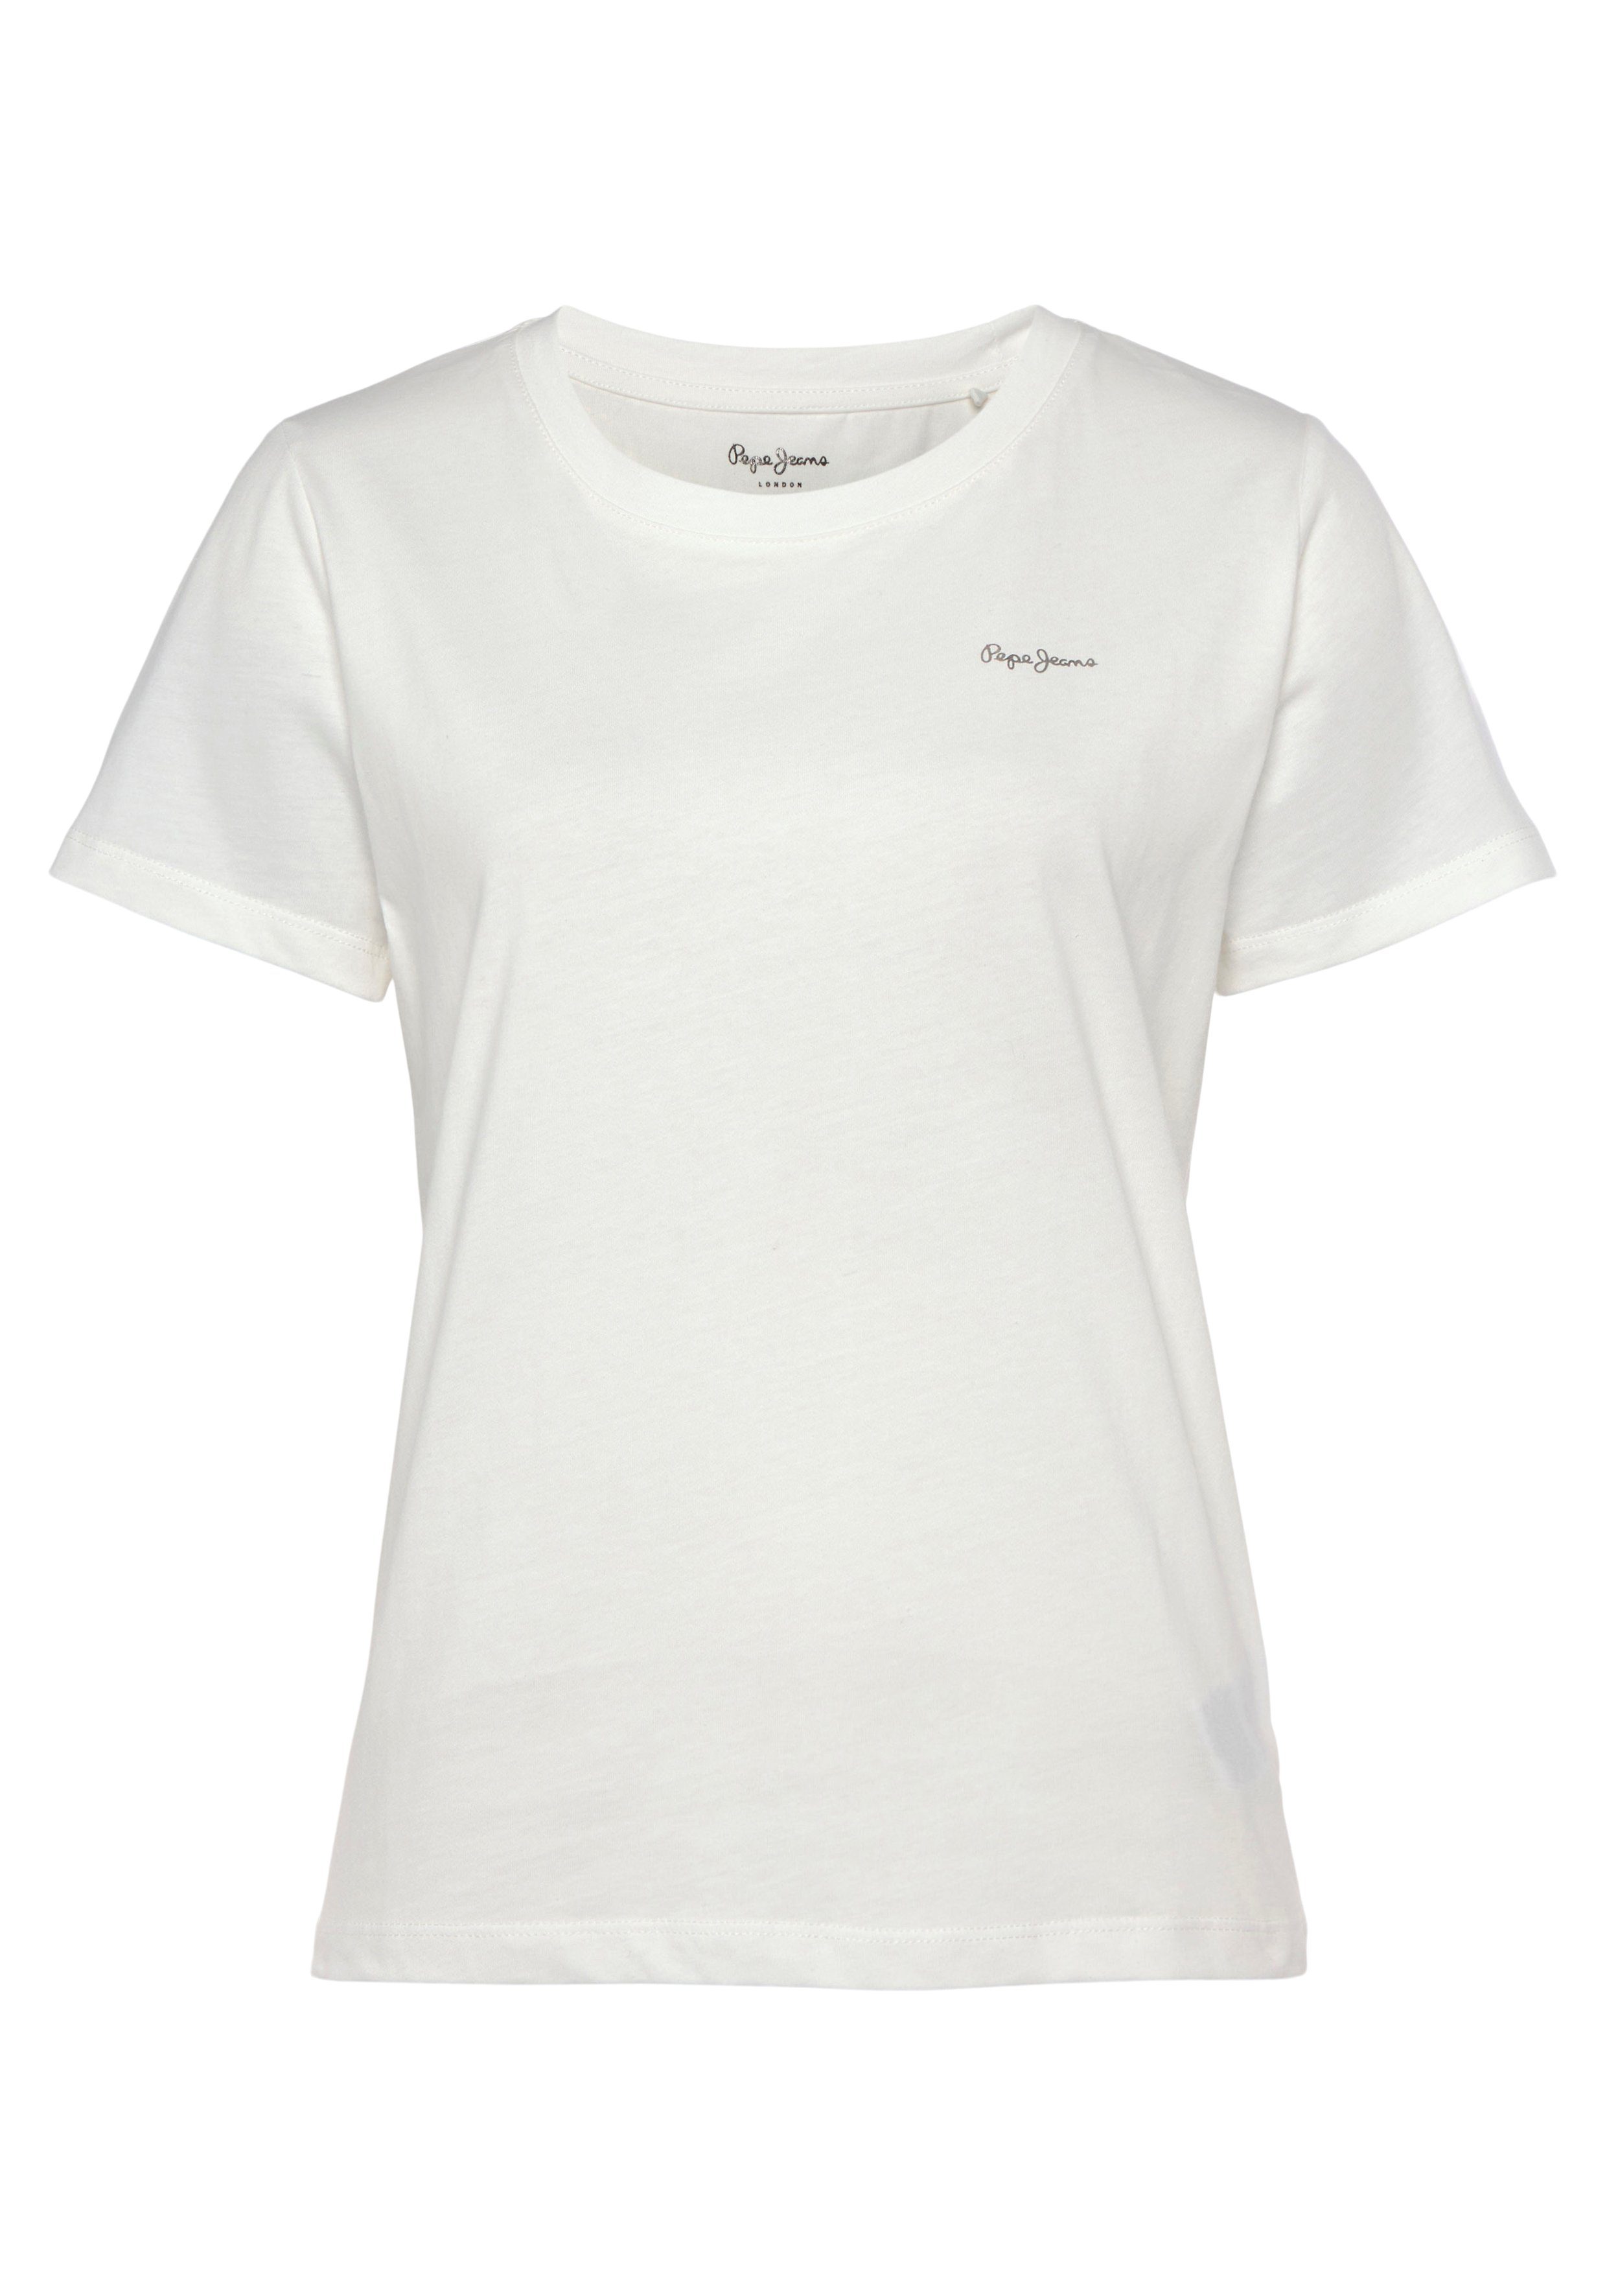 Pepe TOMITA Jeans T-Shirt offwhite